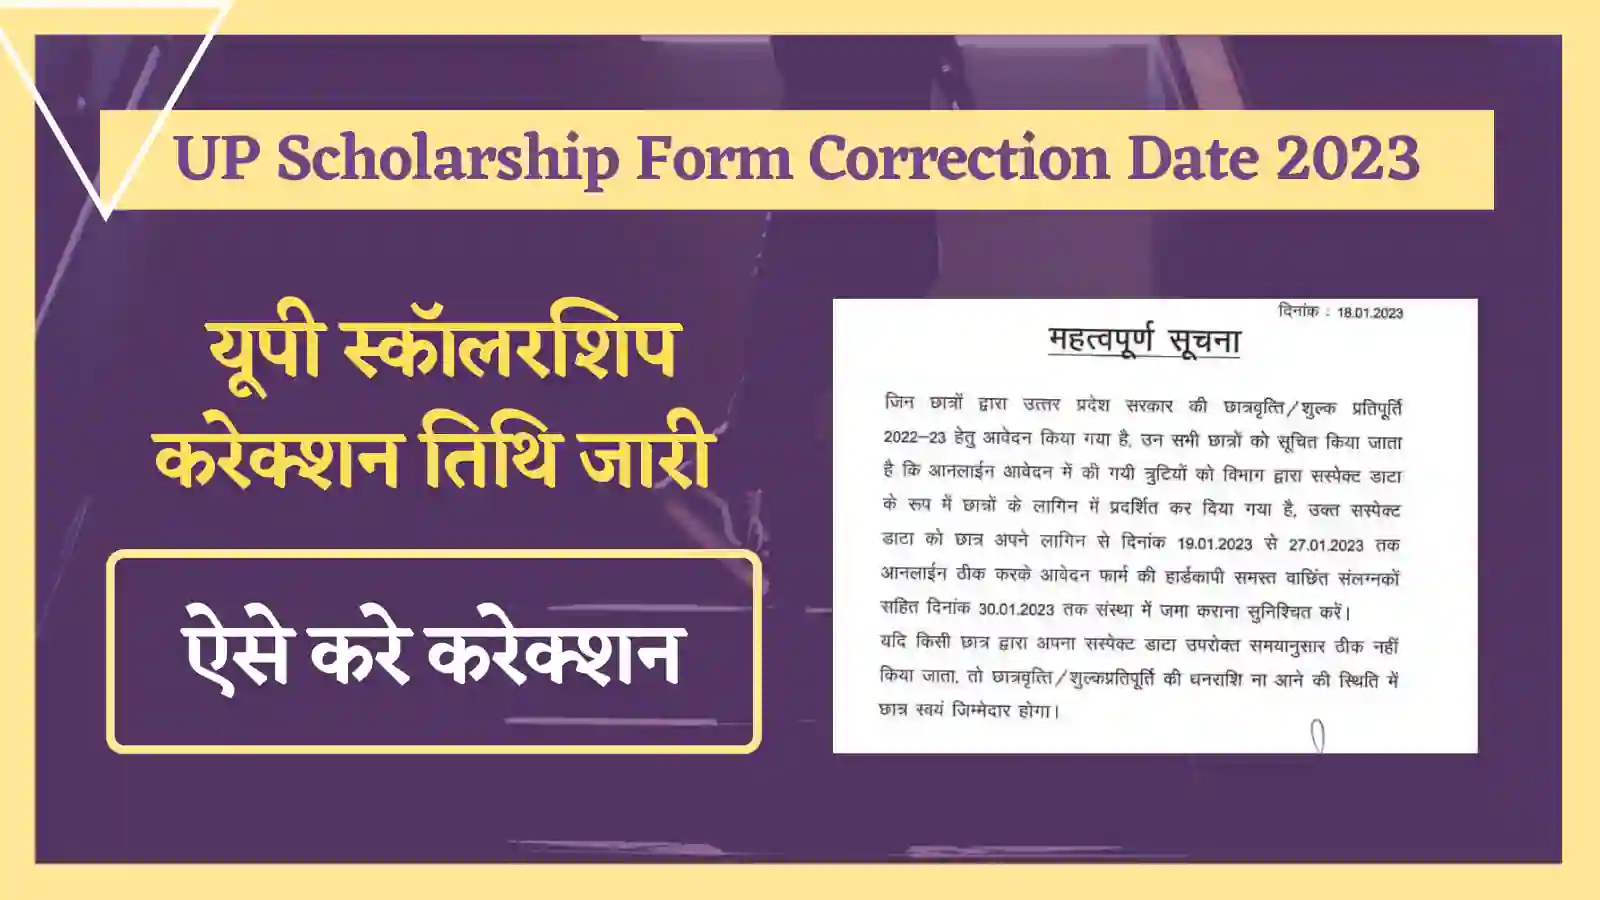 UP Scholarship Form Correction Date 2023